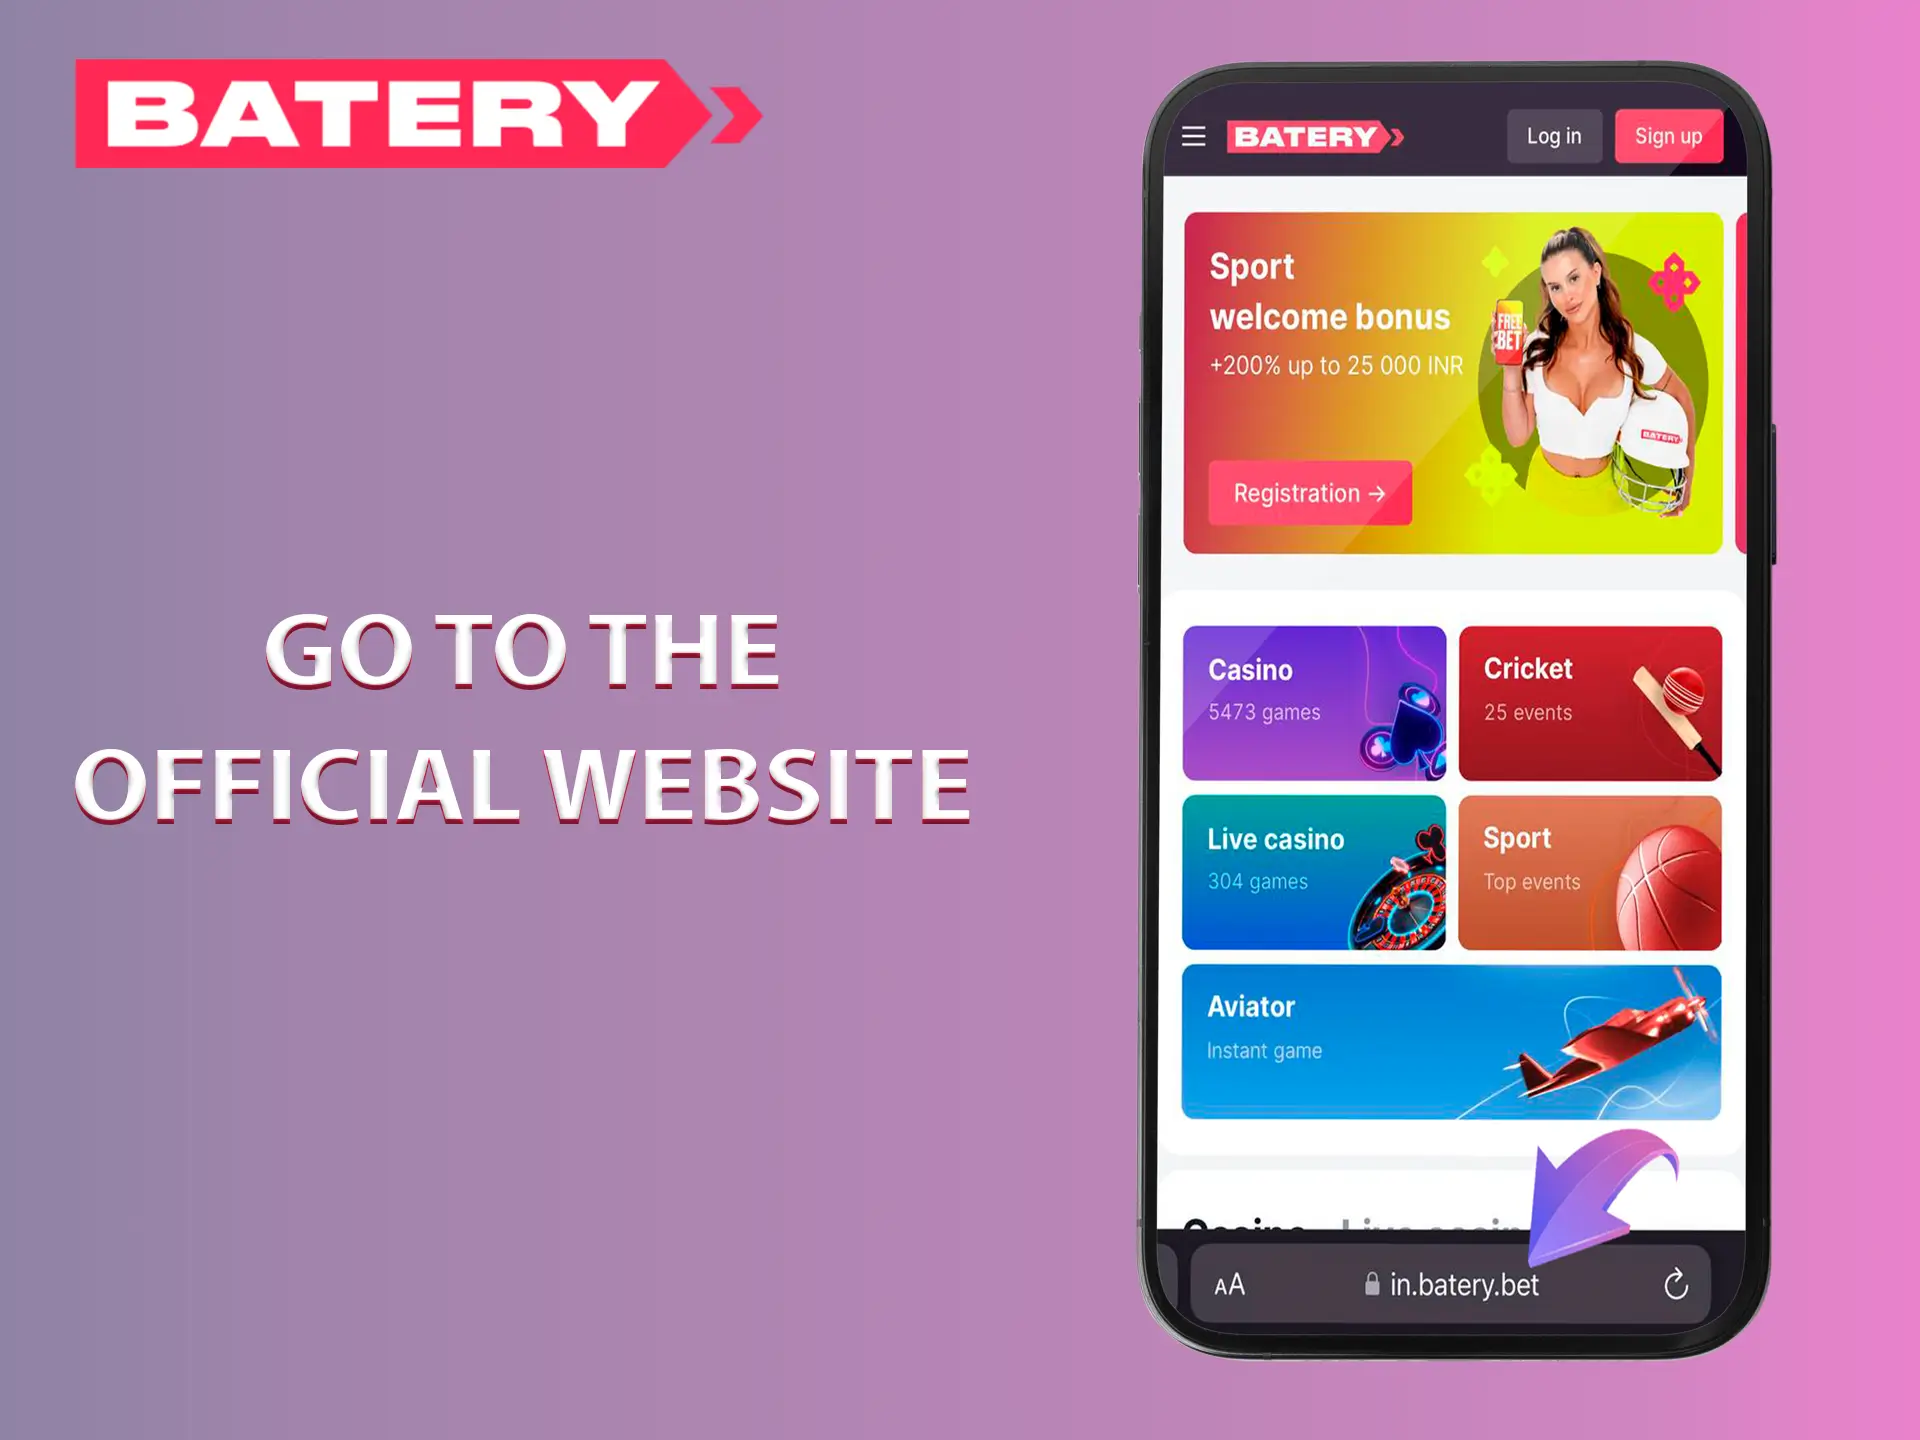 Type the Batery website into the address bar of your browser on your iOS device.